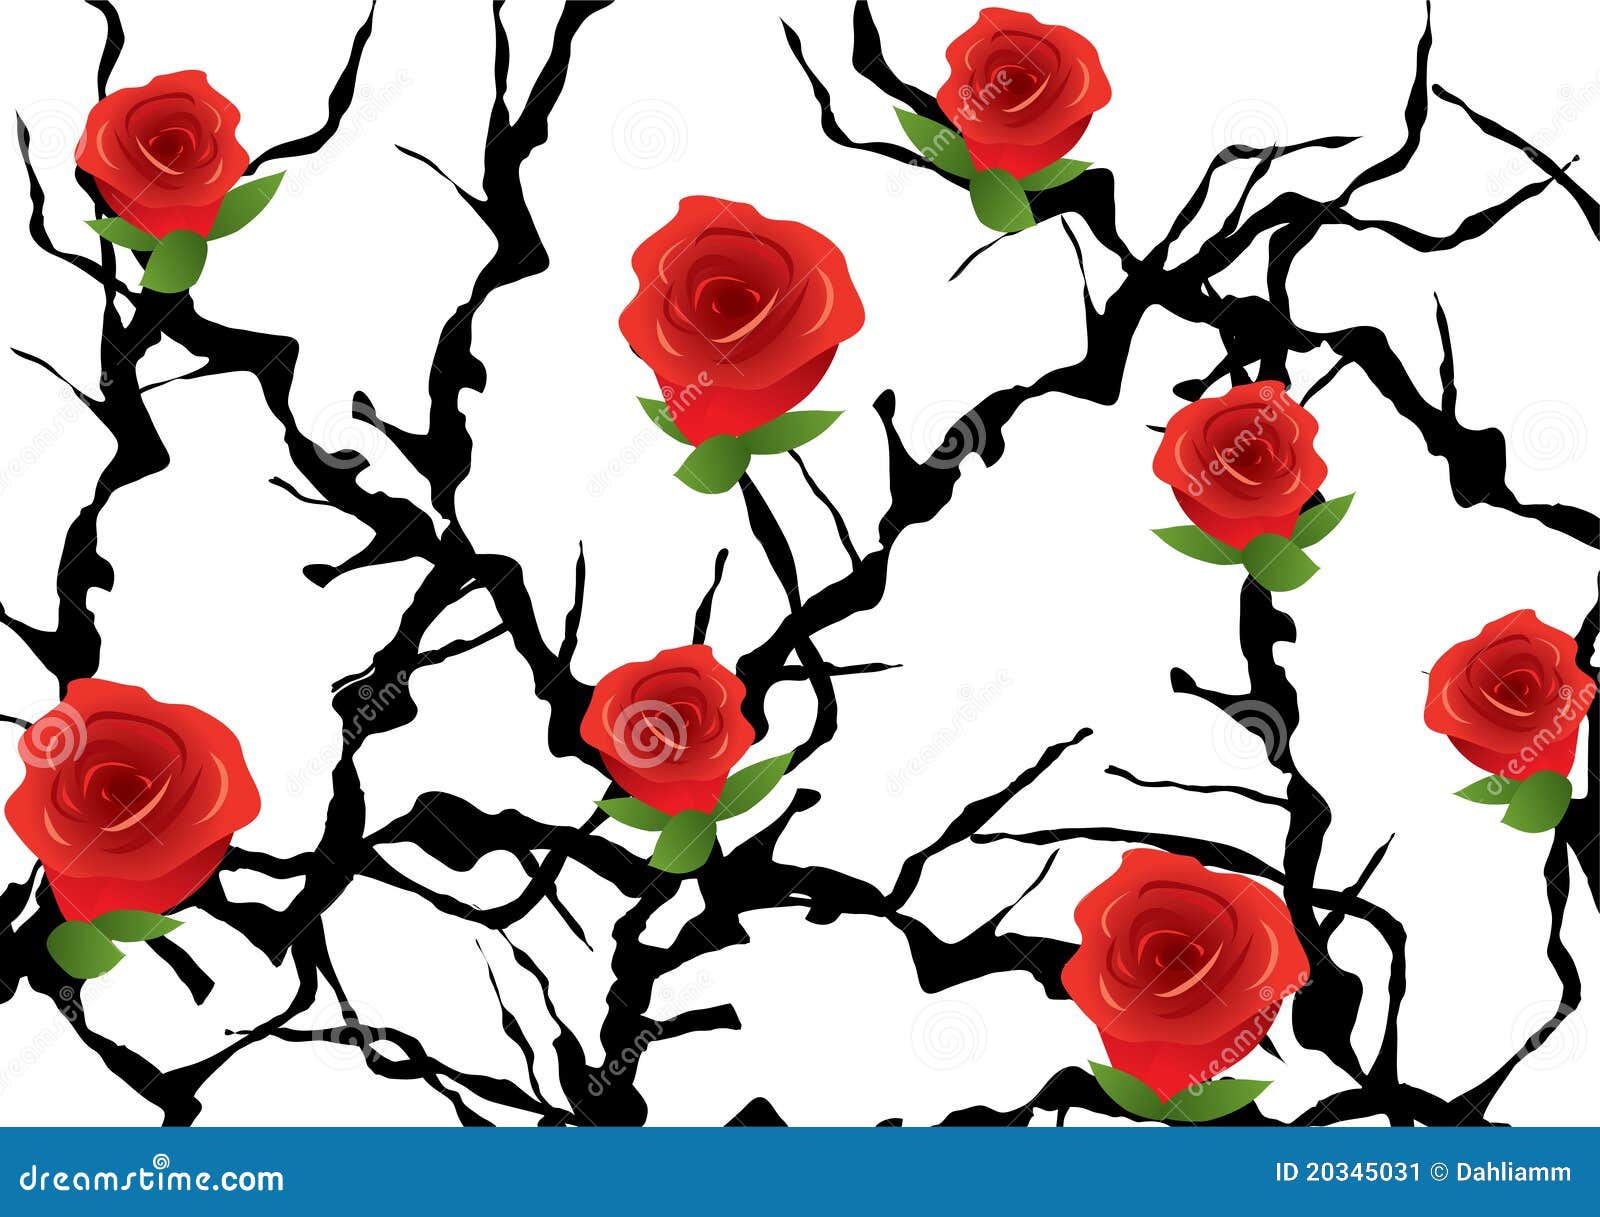 Blackthorn bush with roses stock vector. Illustration of isolated